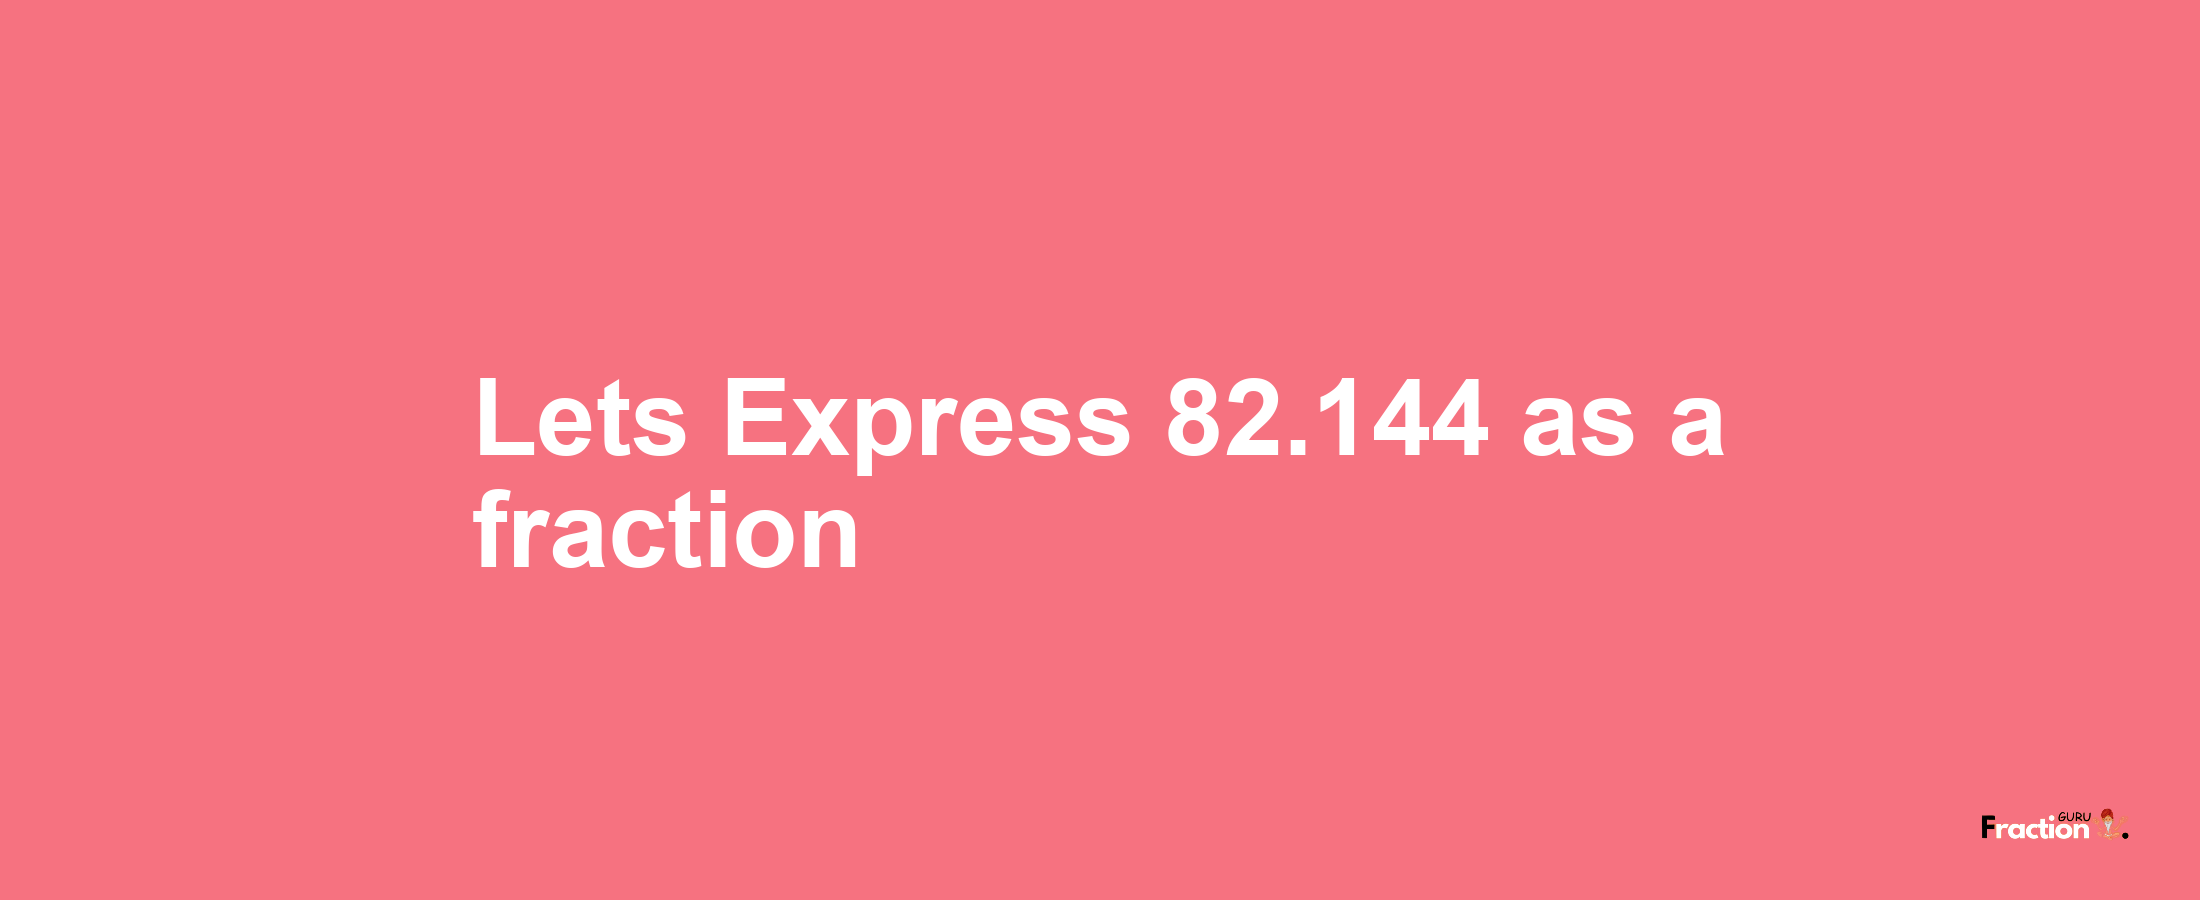 Lets Express 82.144 as afraction